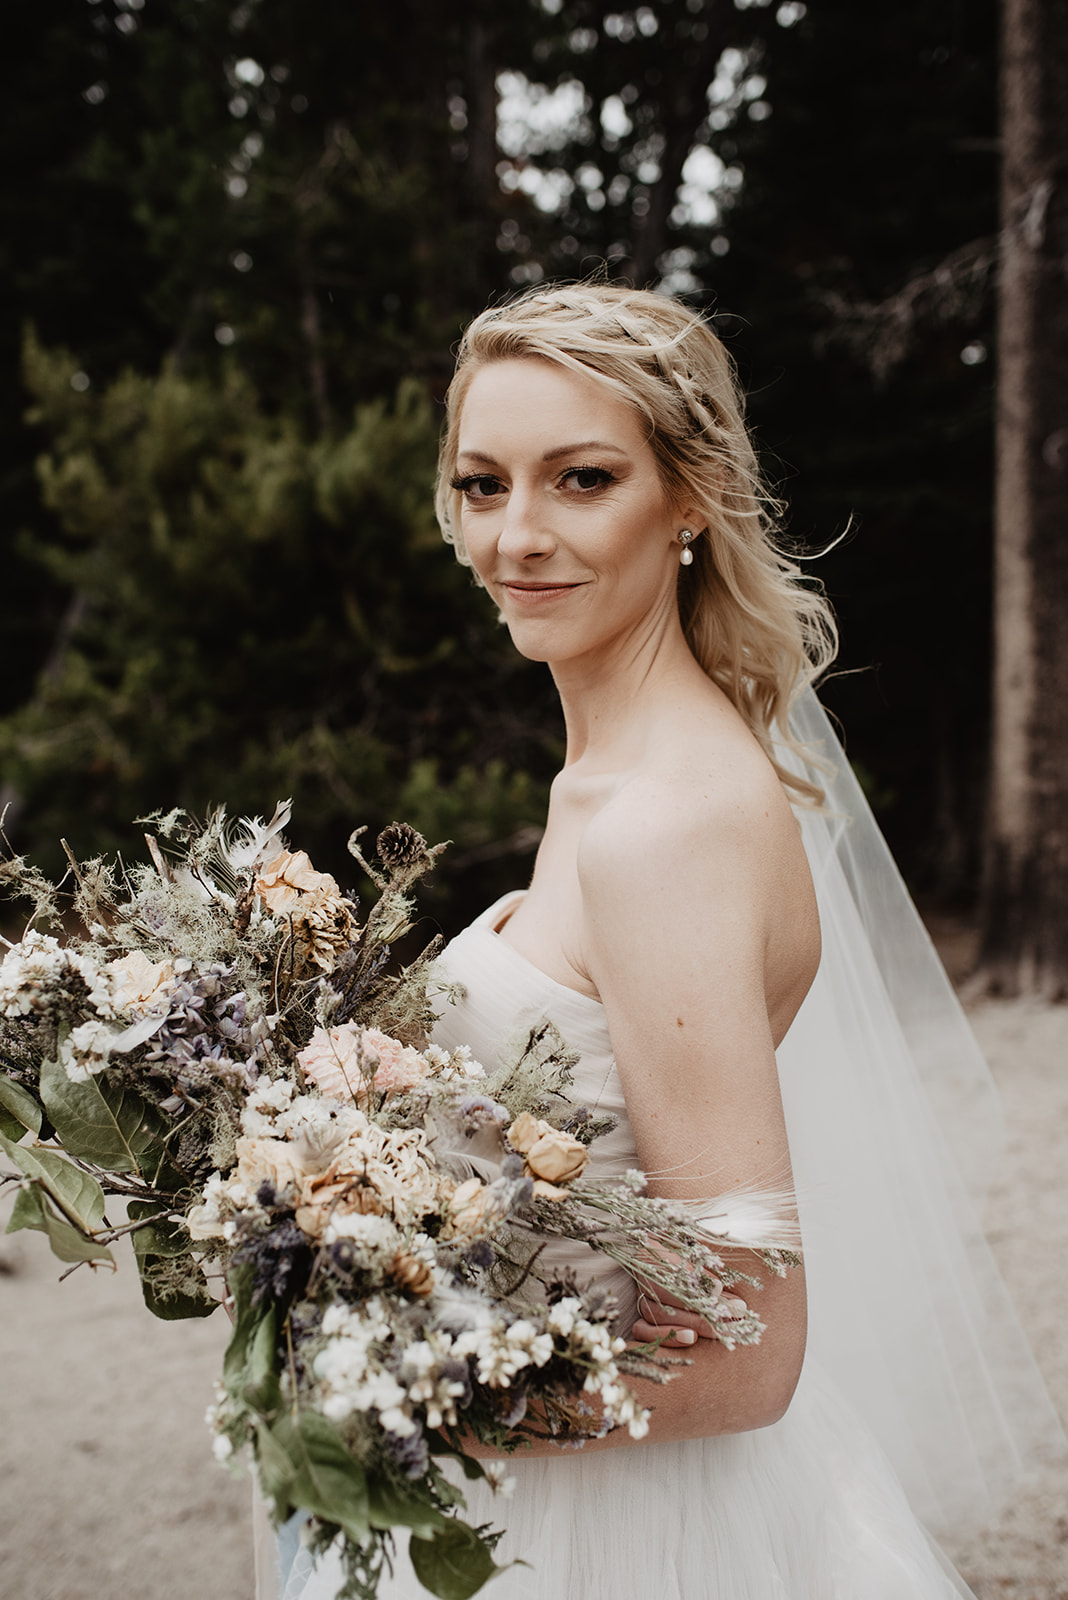 blonde bride looking over her shoulder as she carries her bridal bouquet in Jackson Hole weddings venue, with pine trees towering behind her